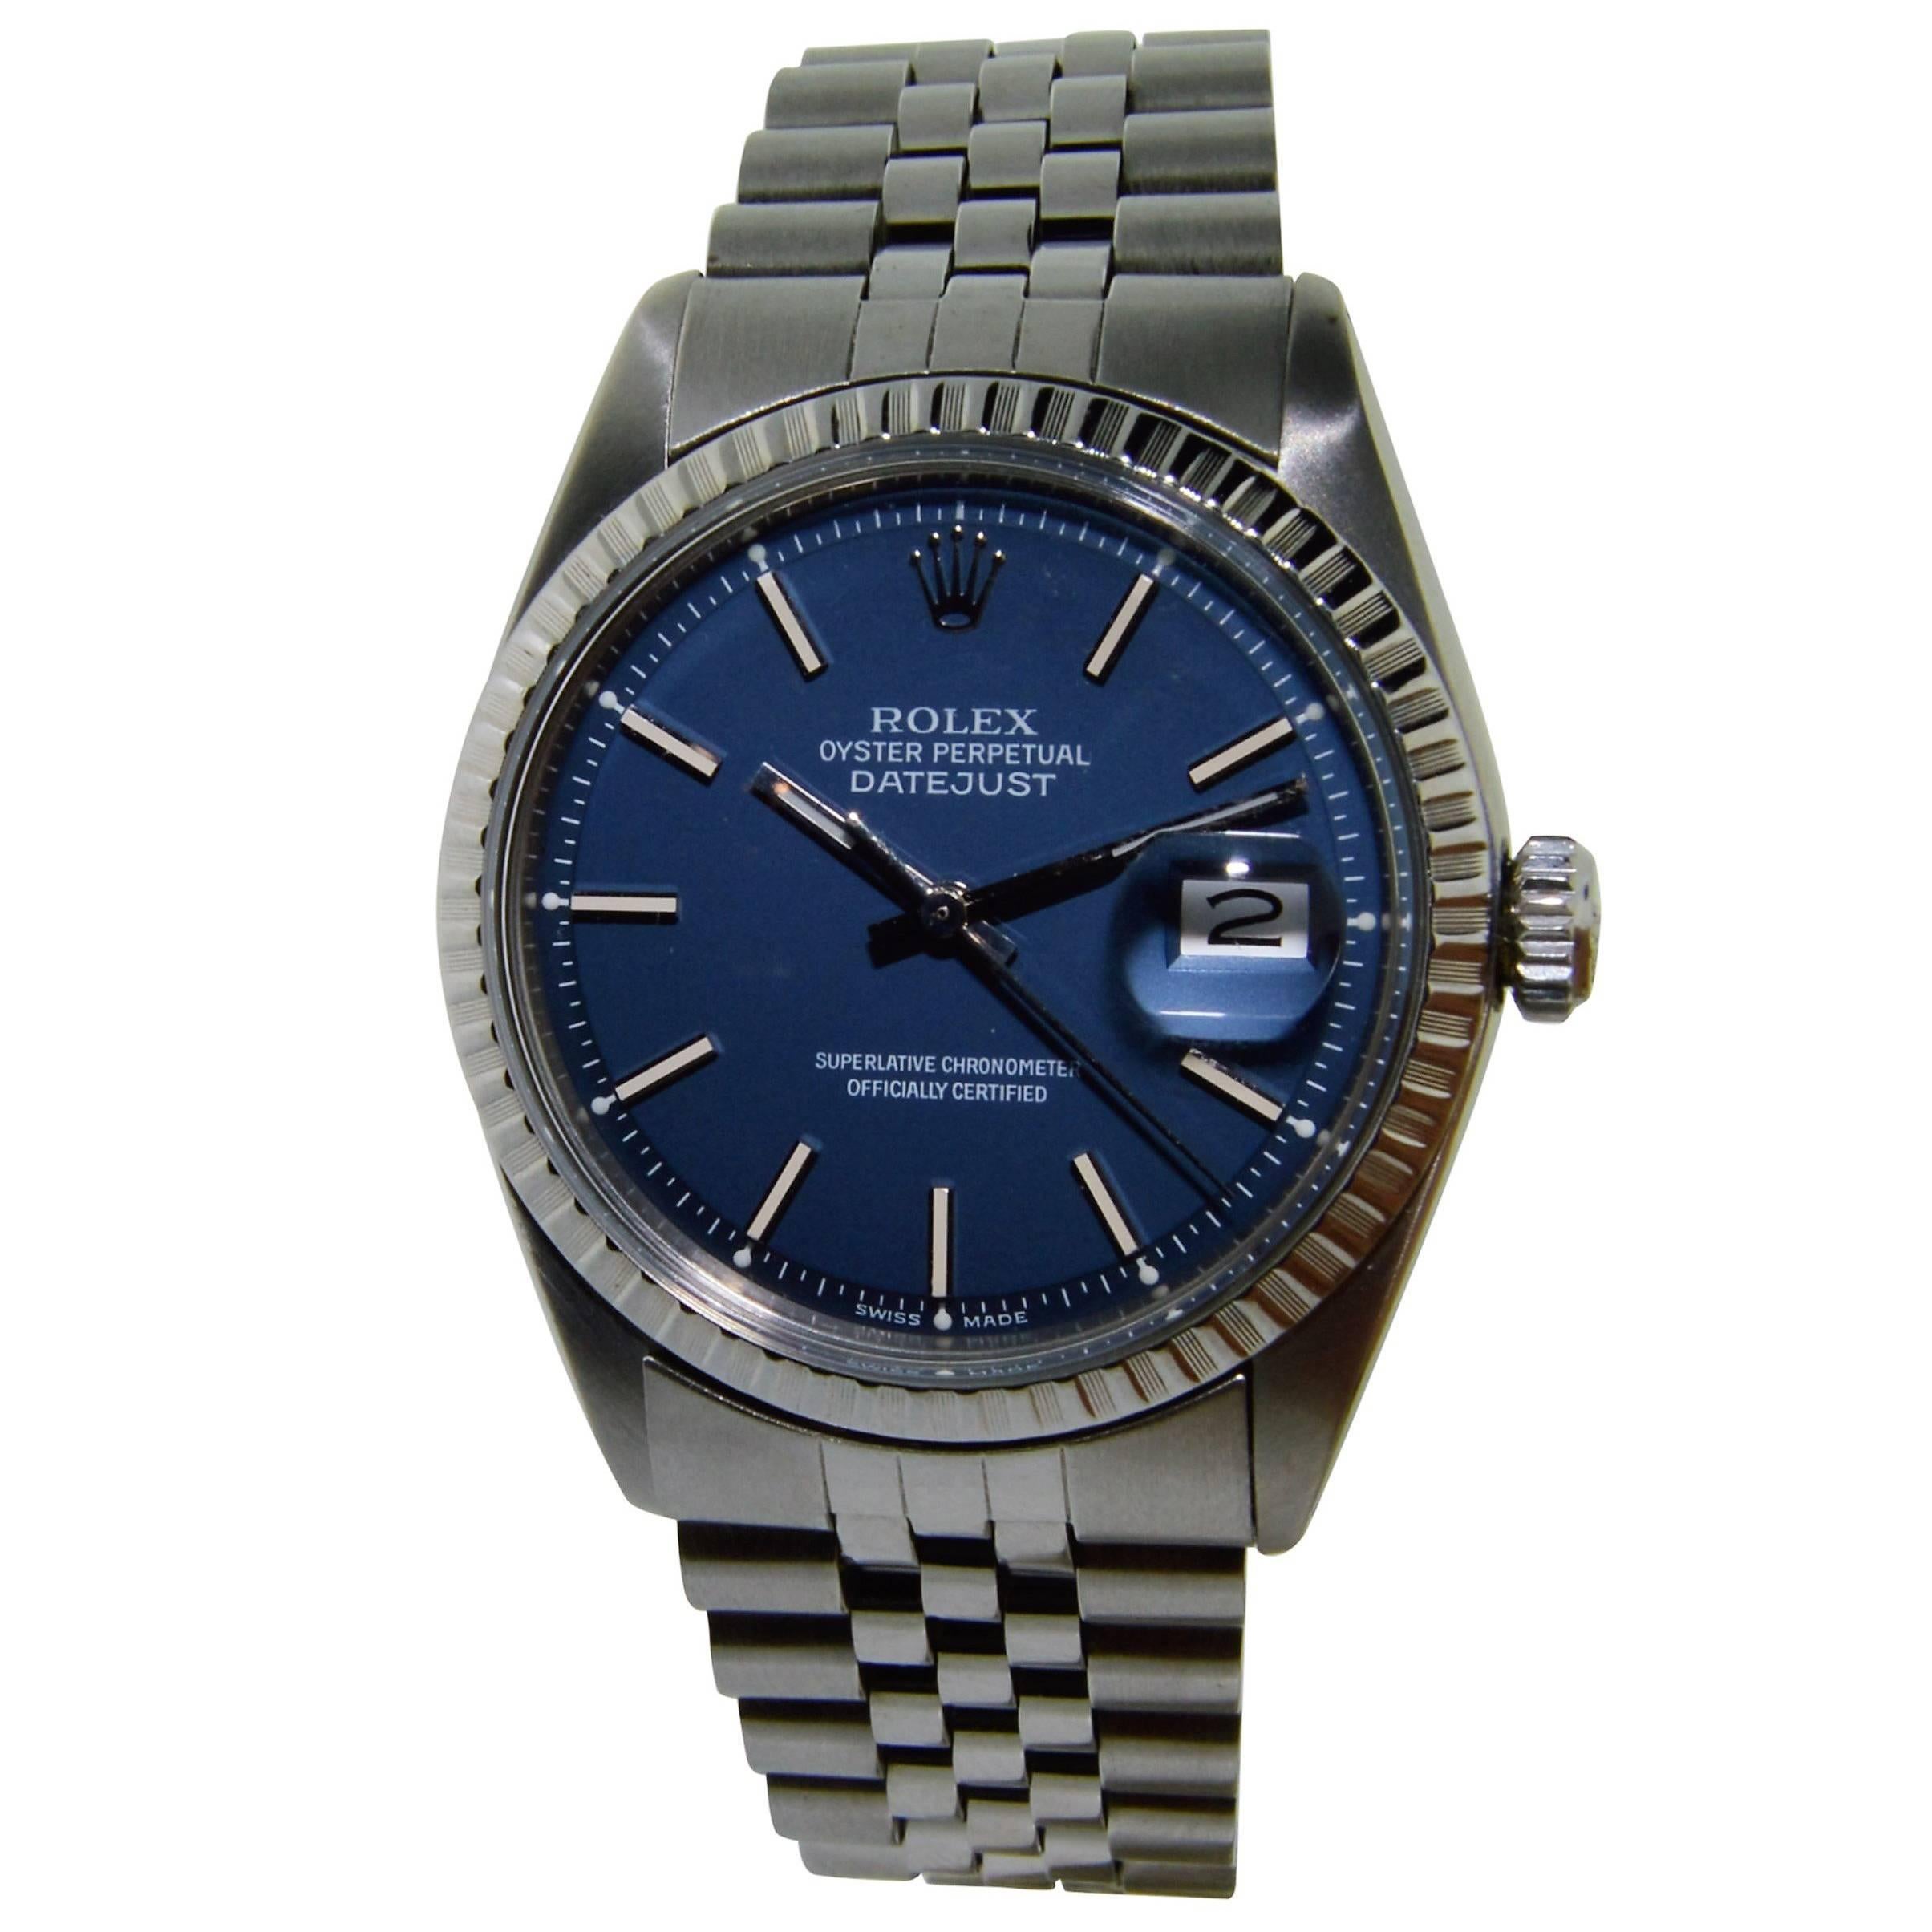 Rolex Stainless Steel Blue Dial Datejust Wristwatch, 1970s